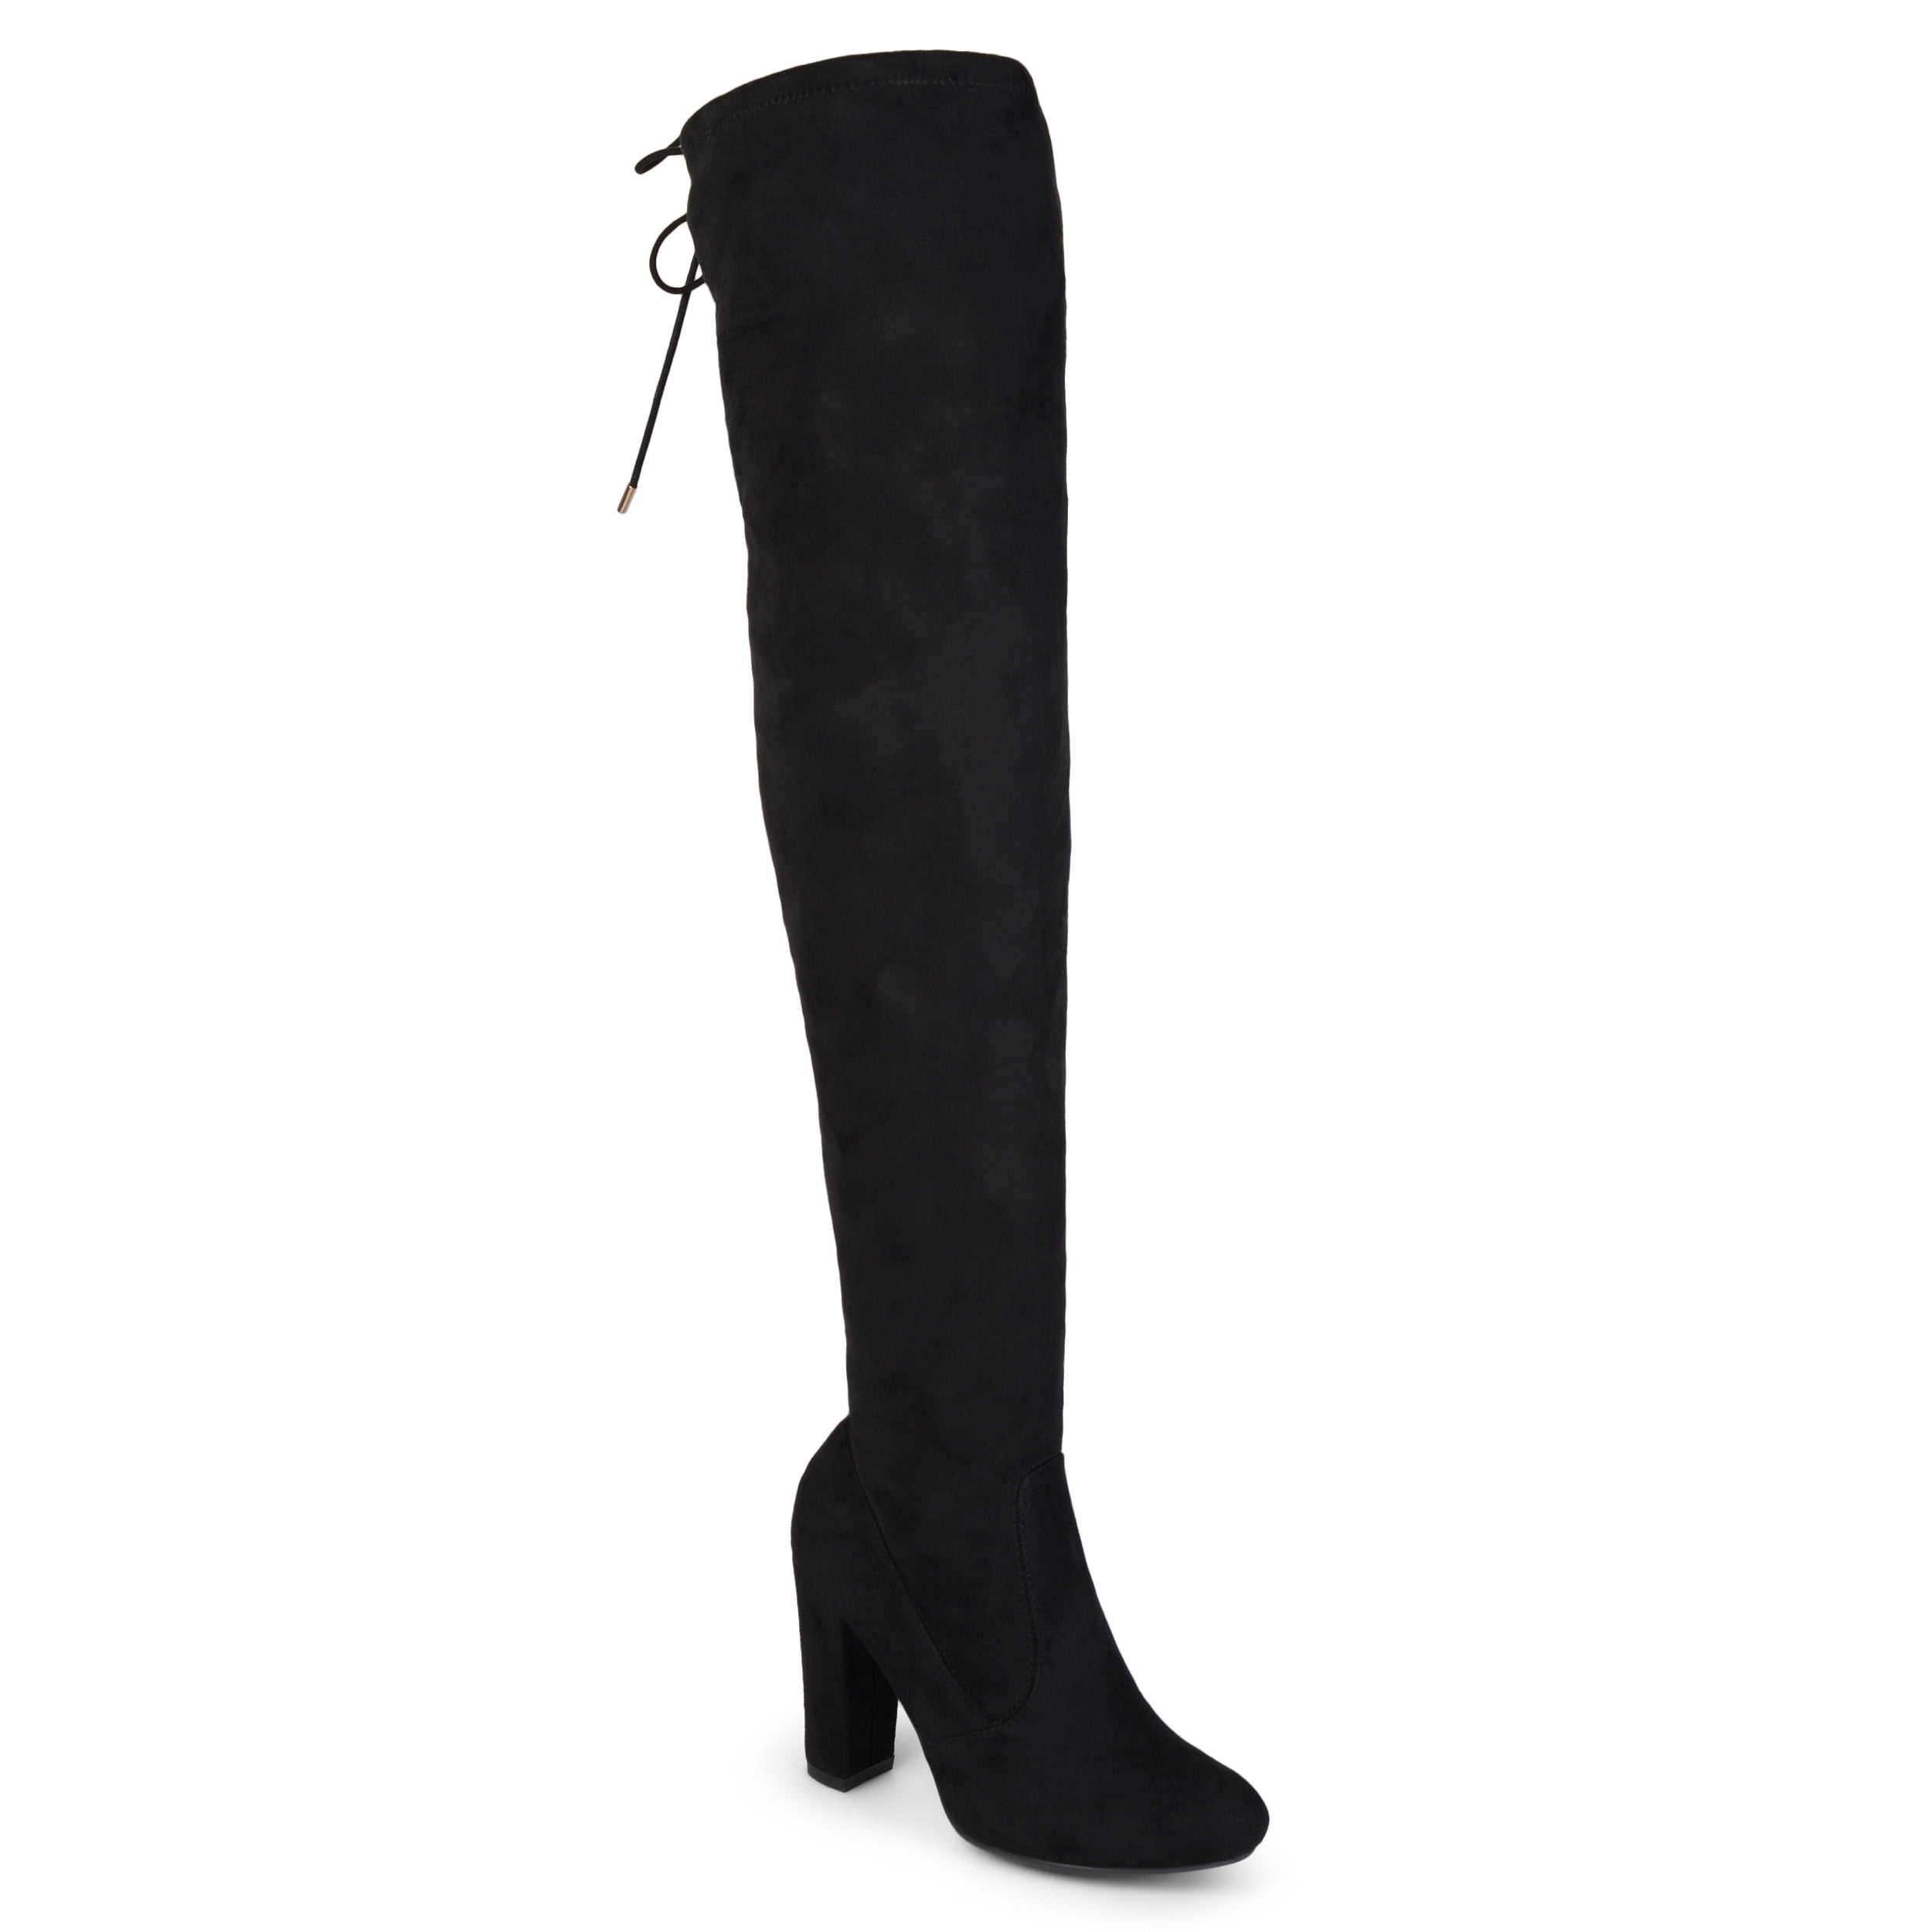 mysoft Women's Fashion Thigh High Winter Boots Over The Knee Long Boots With Chunky Block Heel